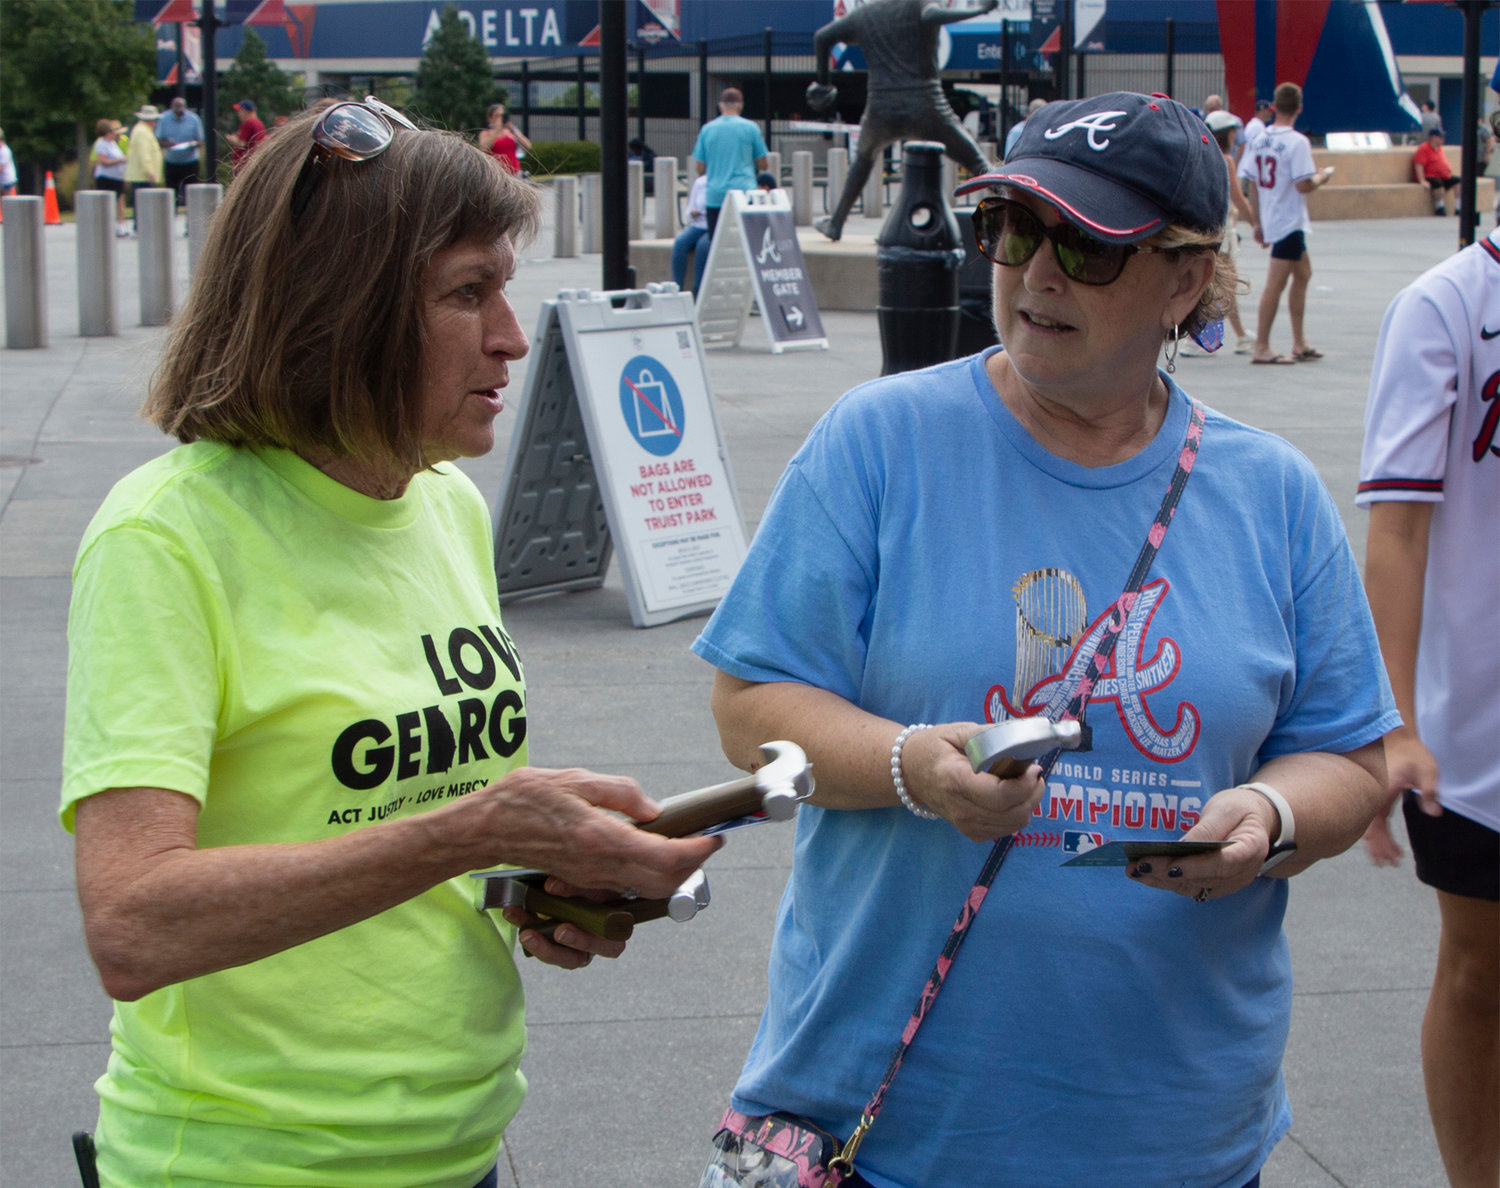 Teresa Royall, Baptist campus minister at Georgia State University, hands a hammer and pamphlet to a fan to promote Wellspring Living, which provides housing to survivors of human trafficking, prior to the Atlanta Braves game Sunday, Sept. 18, 2022, in Atlanta. (Christian Index/Henry Durand)